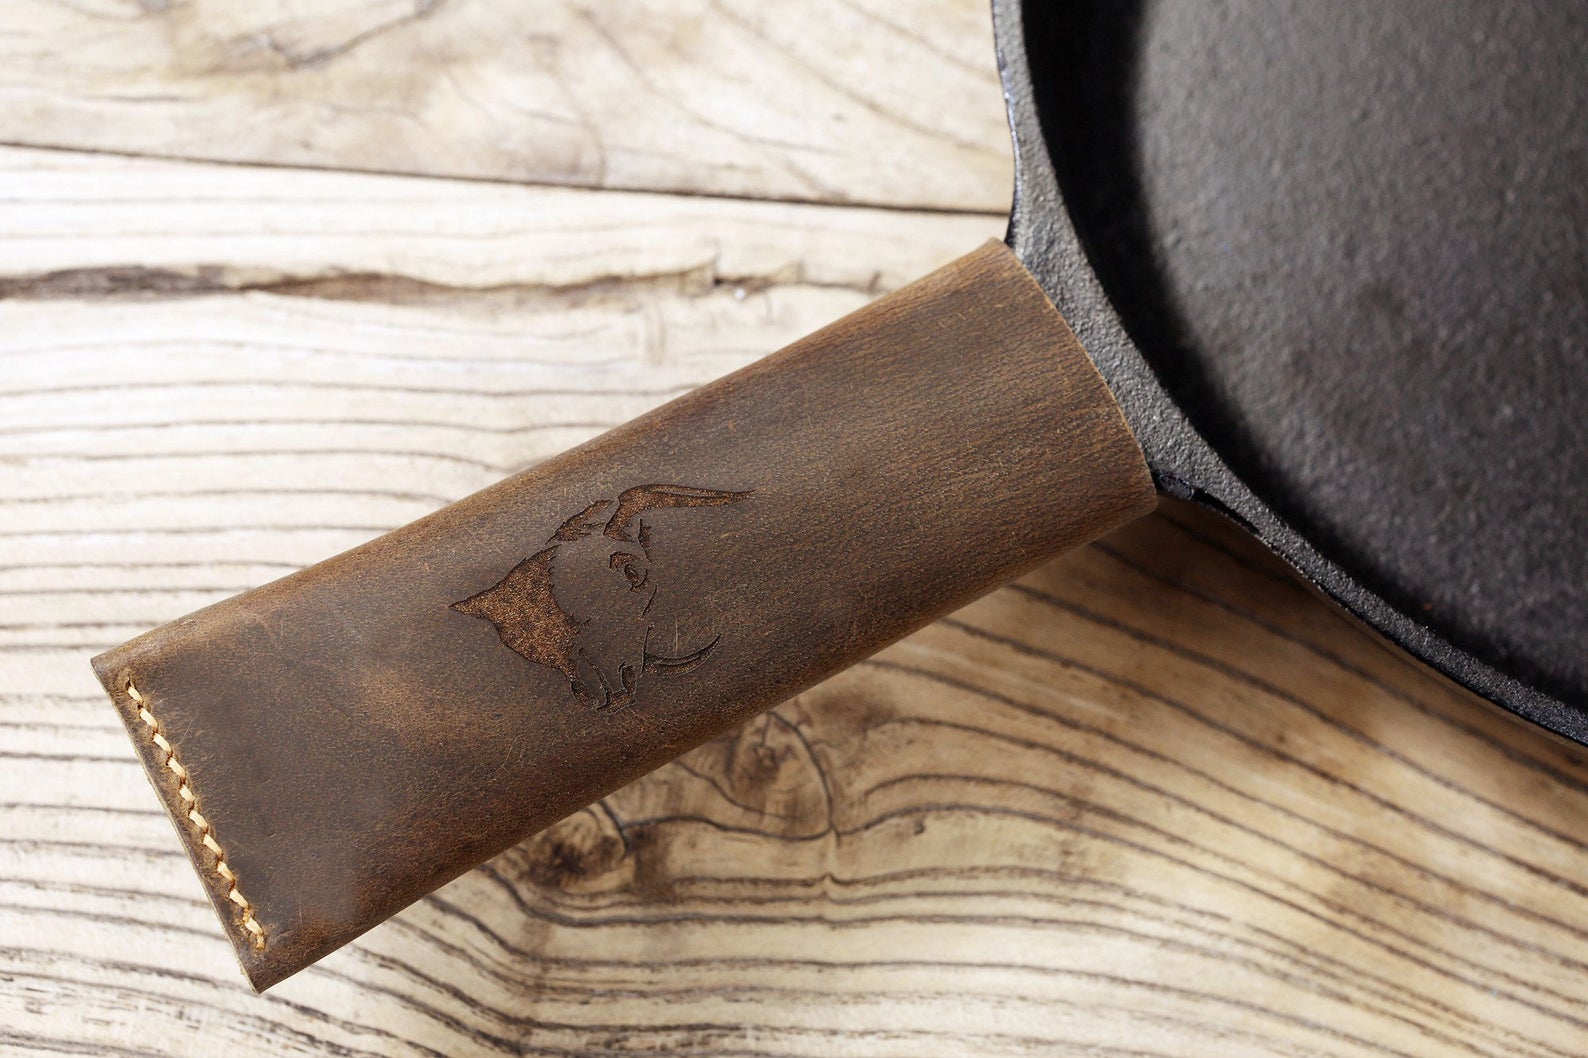 Handmade Leather Skillet Handle Cover - Dryad Cookery